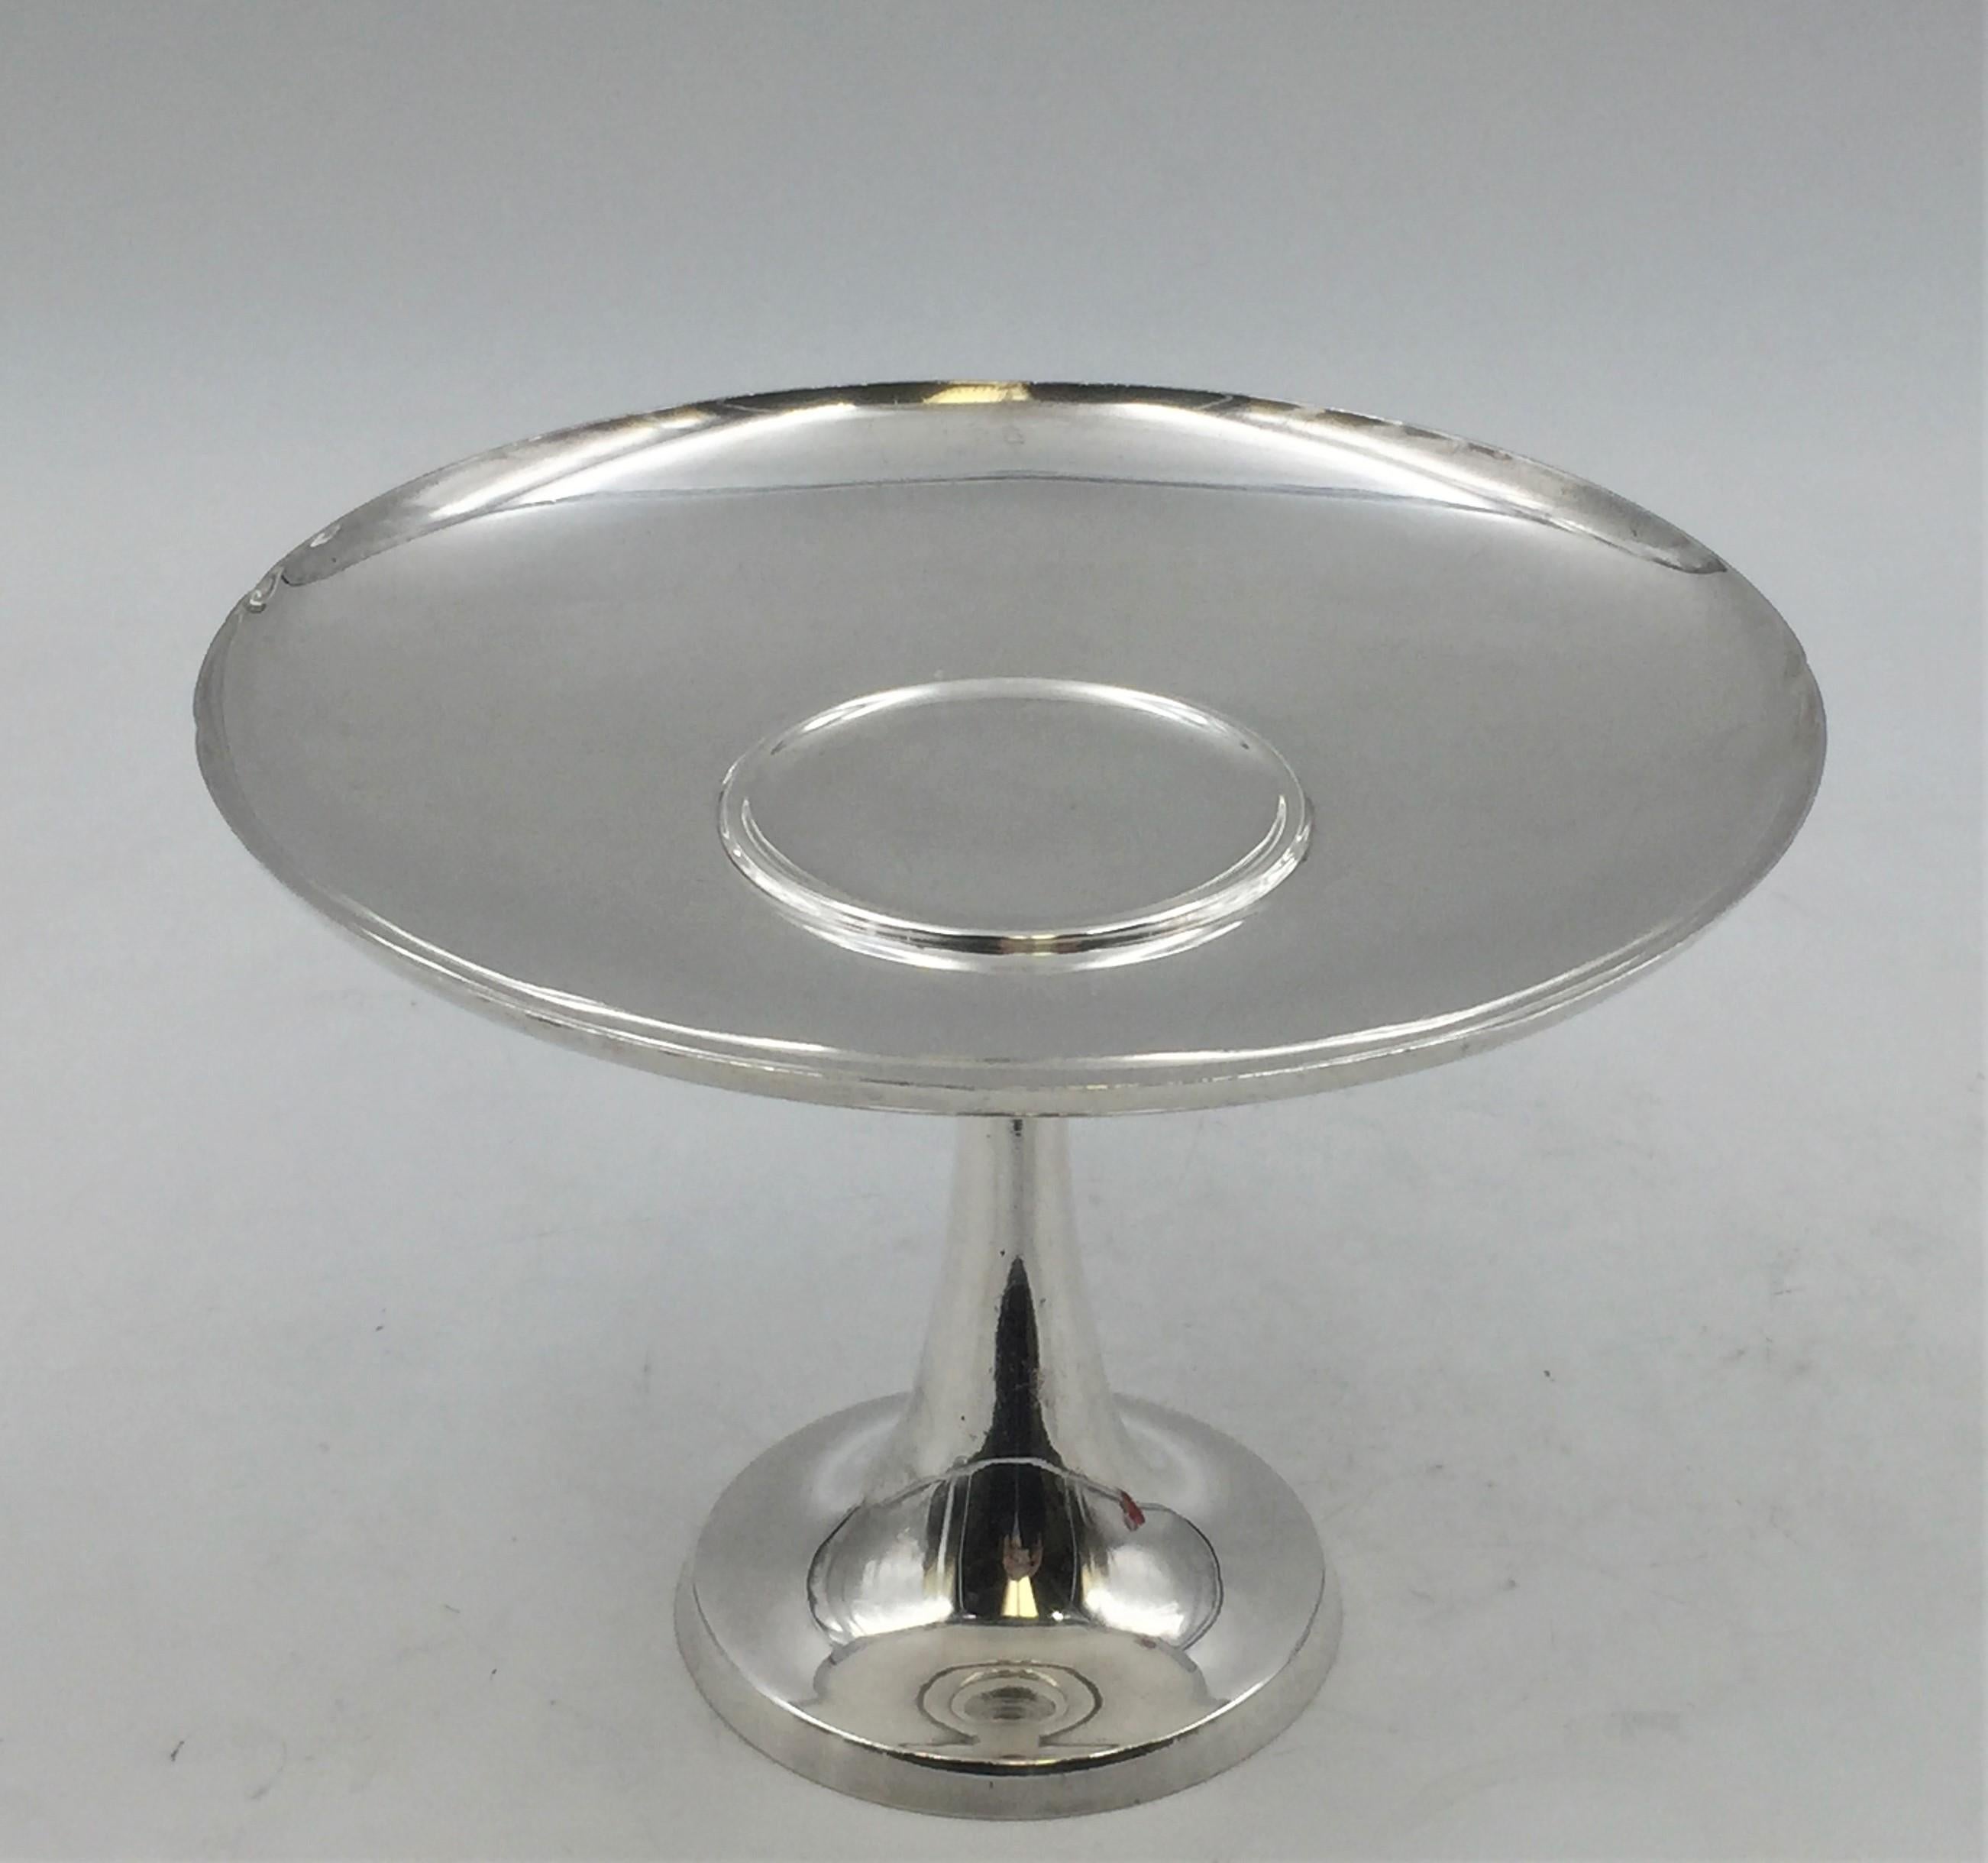 Tiffany & Co. sterling silver centerpiece stand or compote in pattern 23665 from early 1950s and in exquisite Mid-Century Modern style with flowing design. It measures 5 1/2'' in height by 7 2/3'' in diameter, weighs 13.1 ozt, and bears hallmarks as